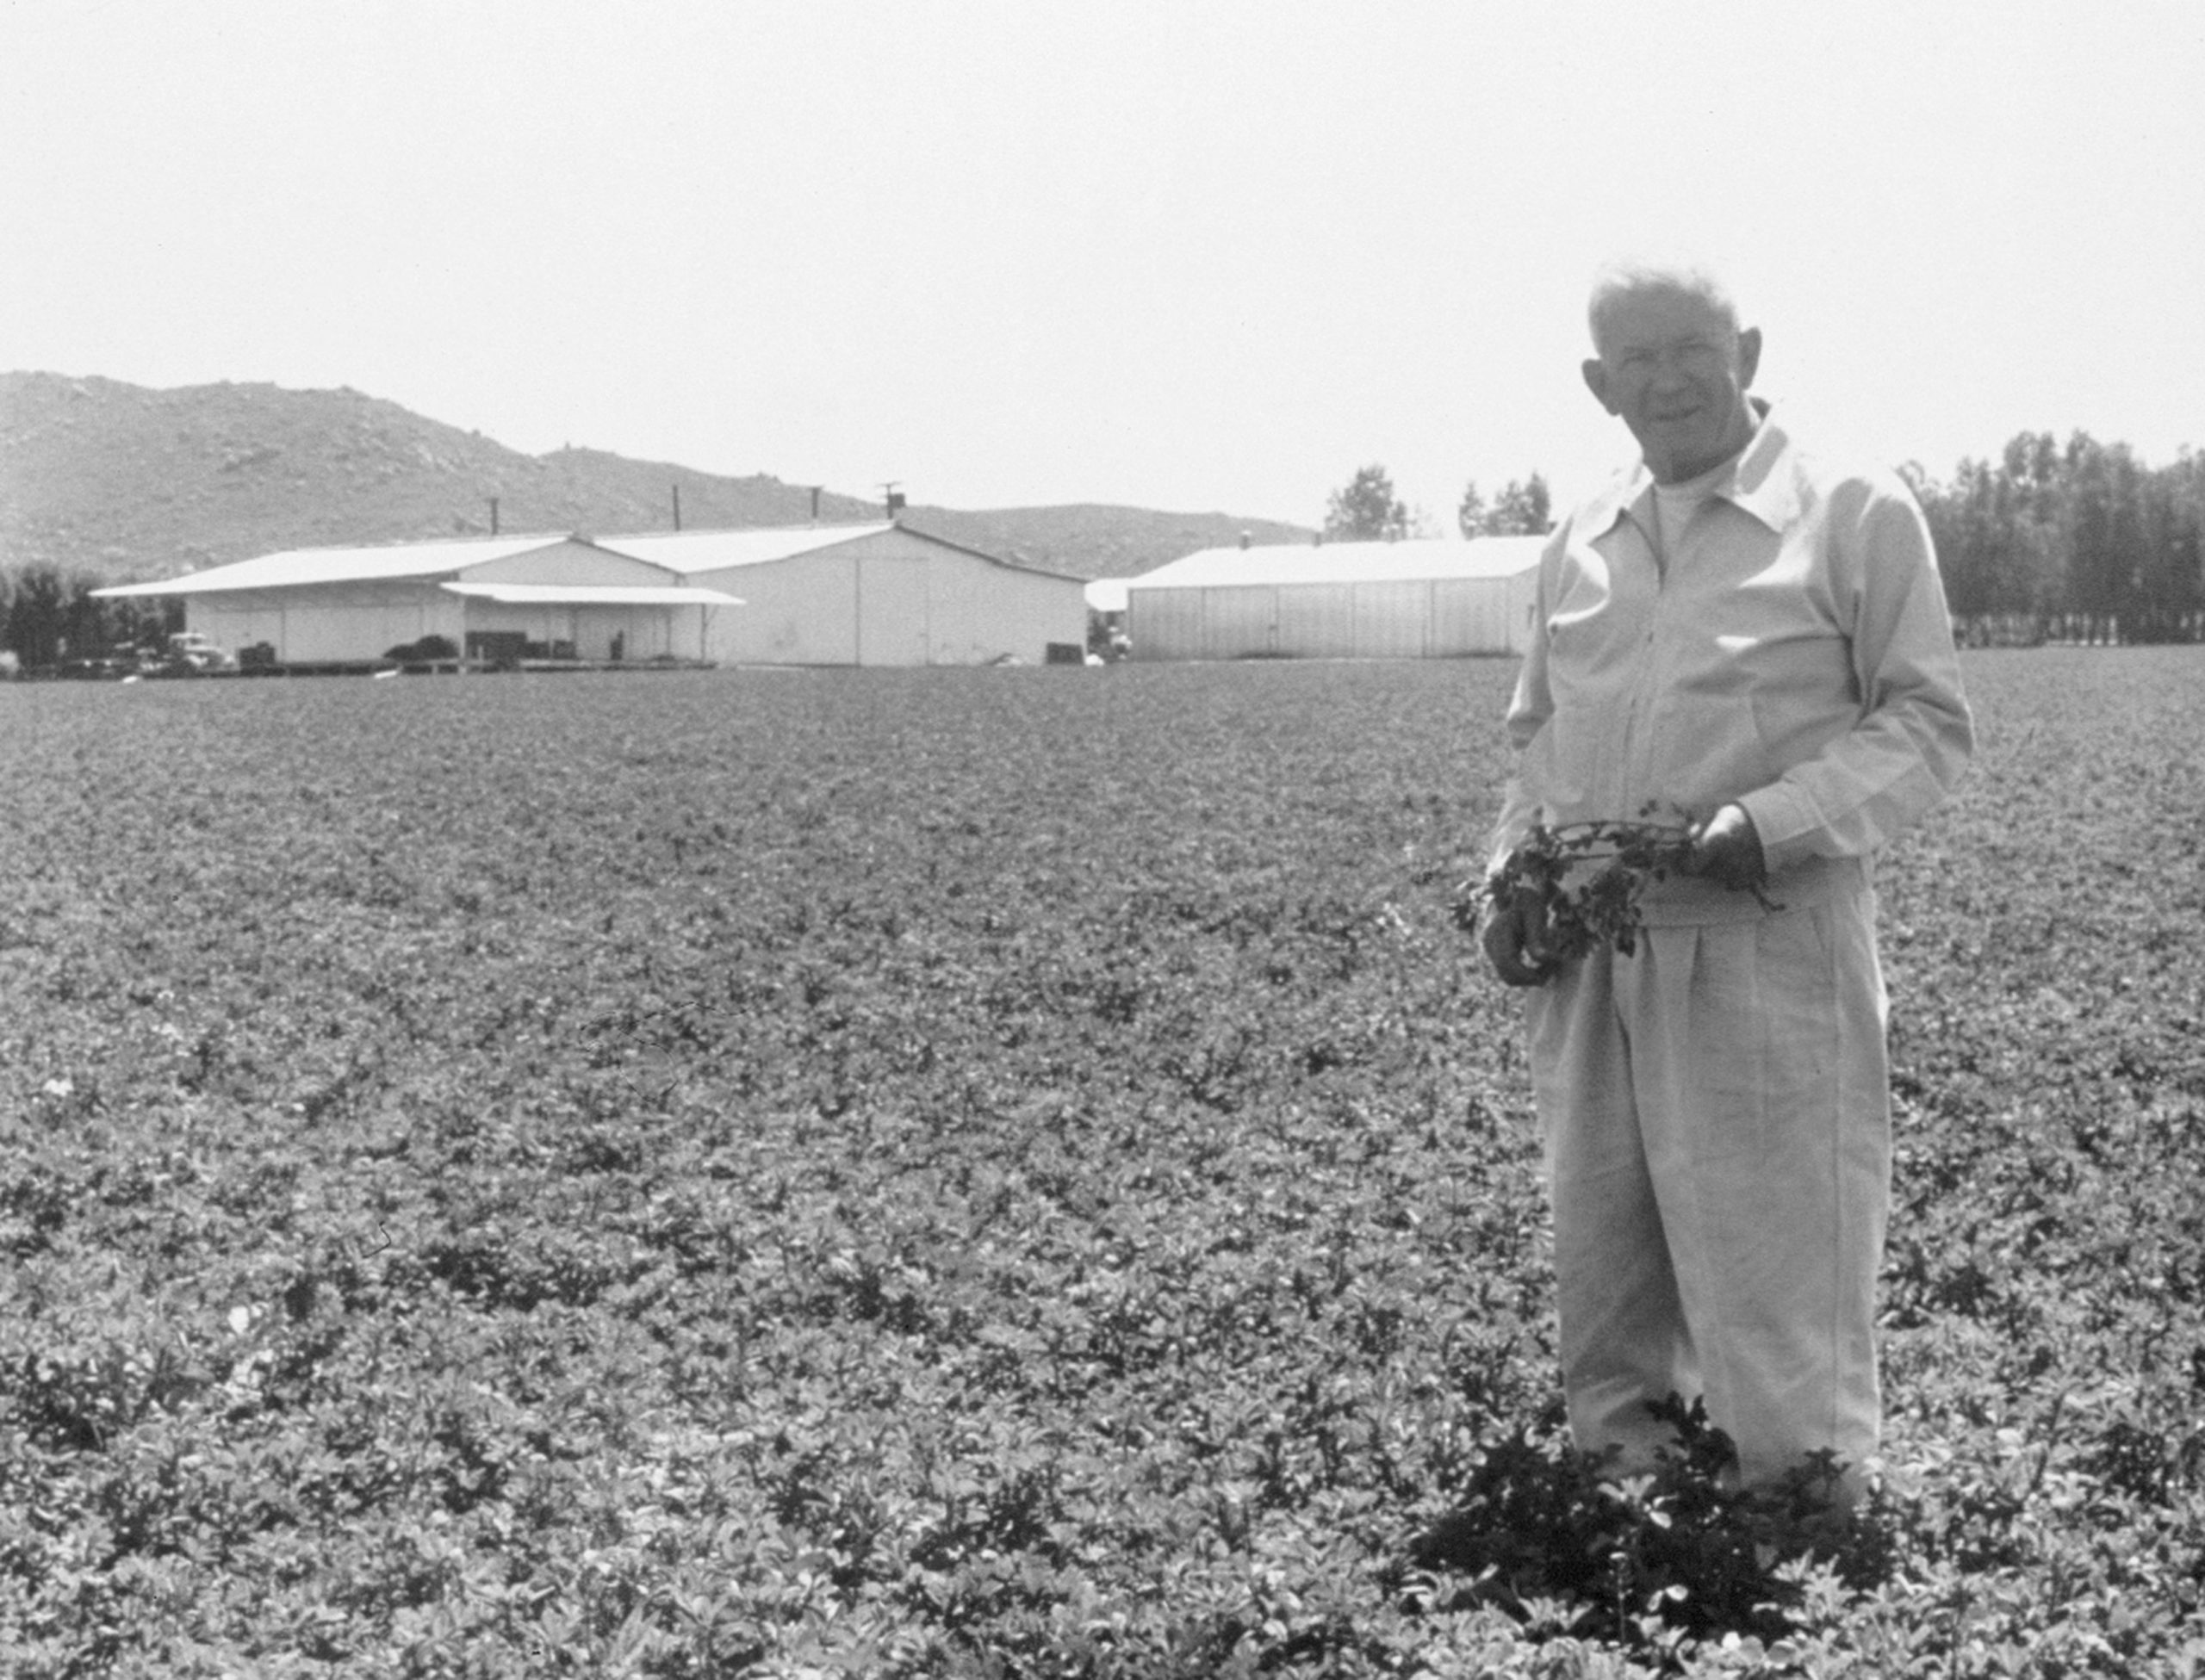 My father Carl F. Rehnborg in a field of alfalfa at the Lakeview Farm, California; circa 1958. The Lakeview farm is now retired, but historically it was considered the “workhorse” farm where we grew many of the long-term crops destined for Nutrilite products. The farm sat on a prehistoric lake bed, which accumulated nutrient-rich sediment that helped contribute to the fertile top soil.